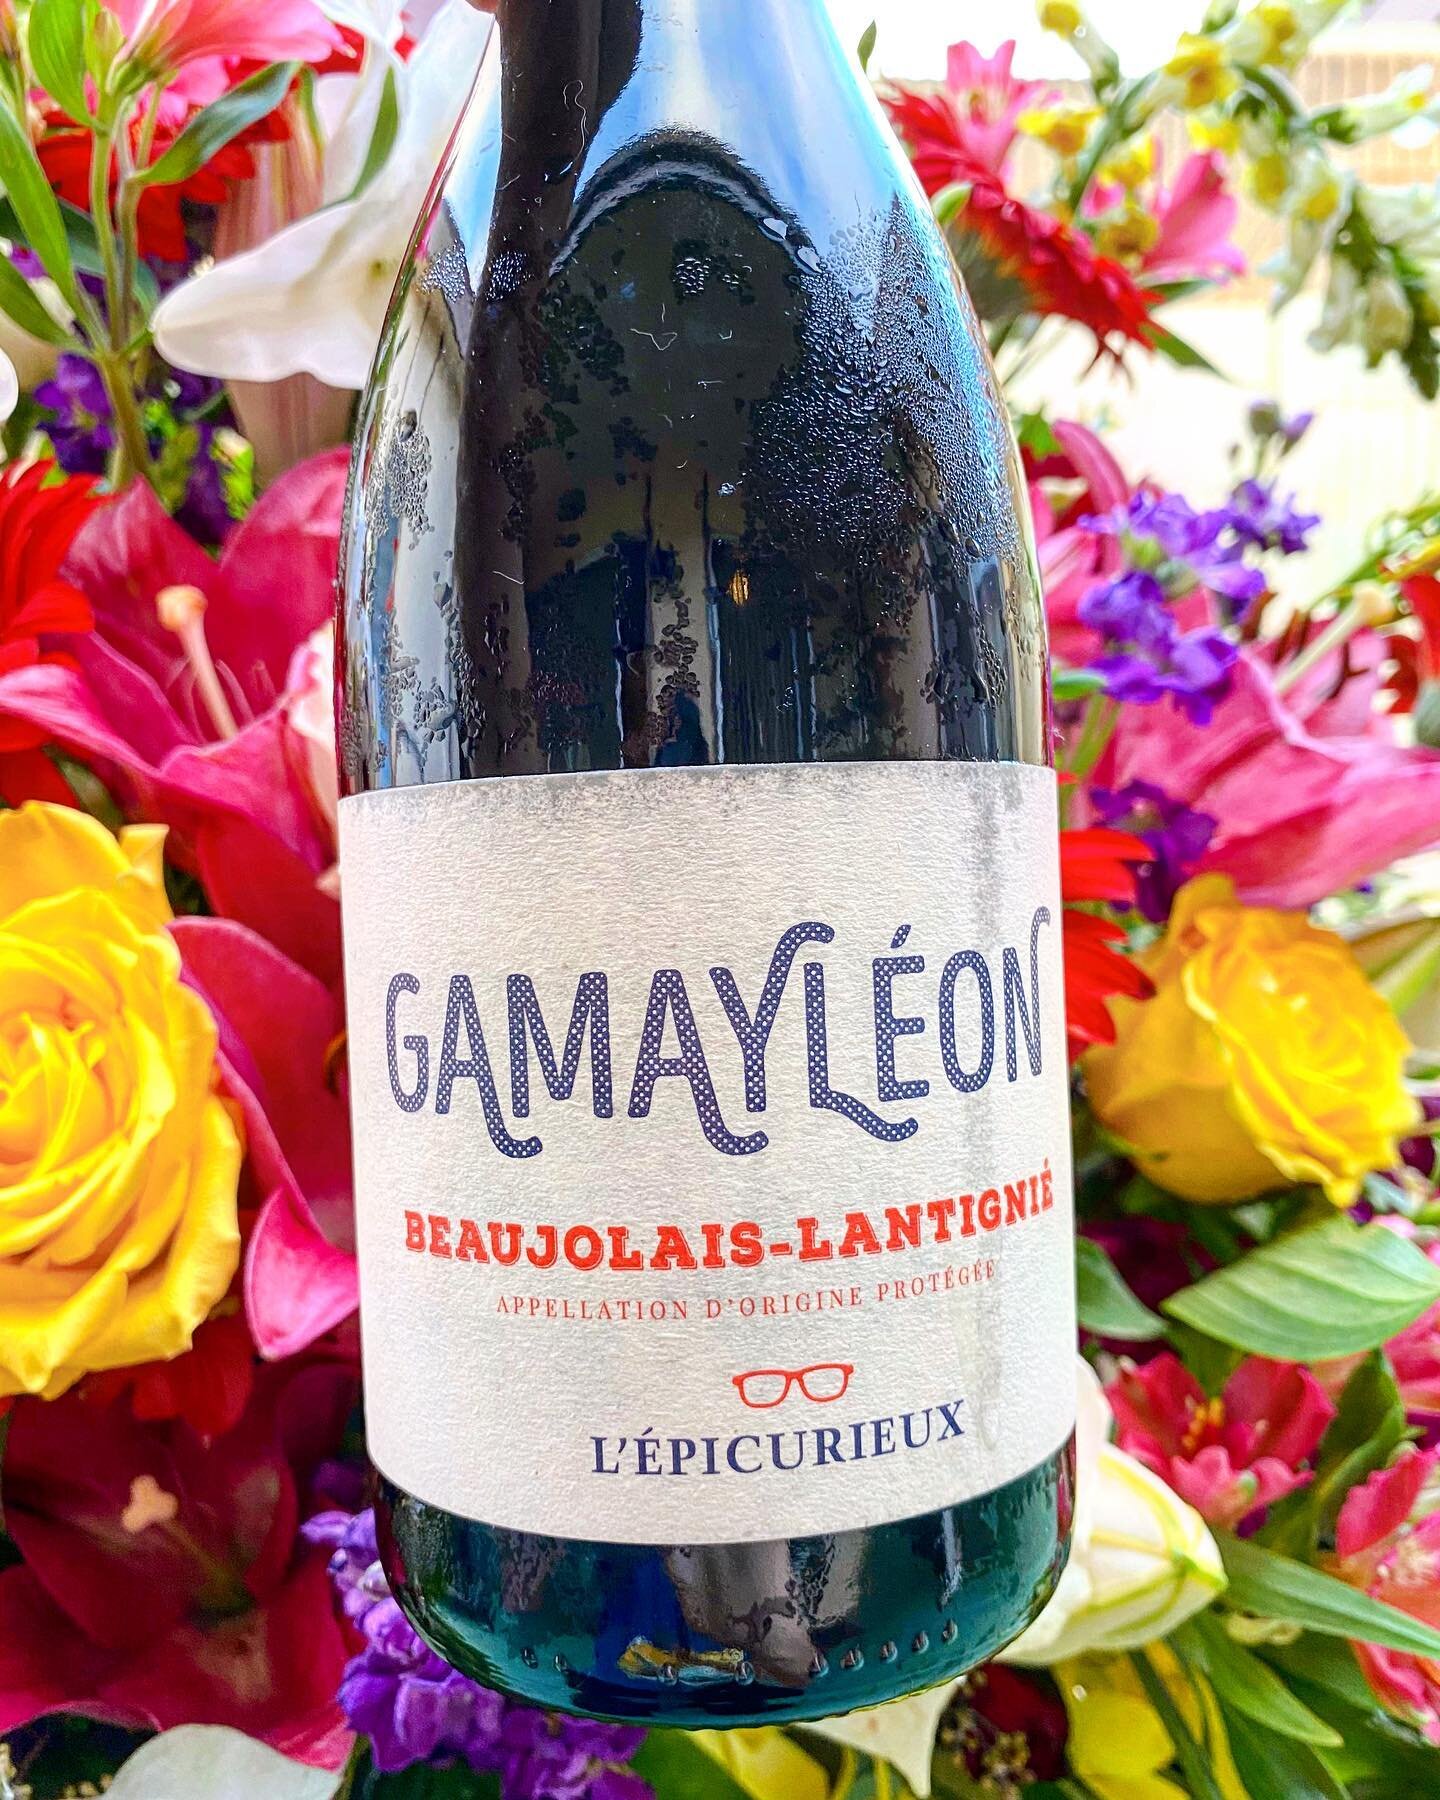 I always love the selections @helenswines has like this delicious &ldquo;Gamayl&eacute;on&rdquo; Beaujolais-Lantignie from L&rsquo;Epicurieux 🍷 I 10000% trust her picks when you pick the &lsquo;surprise me&rsquo; options in her wine deliveries. This